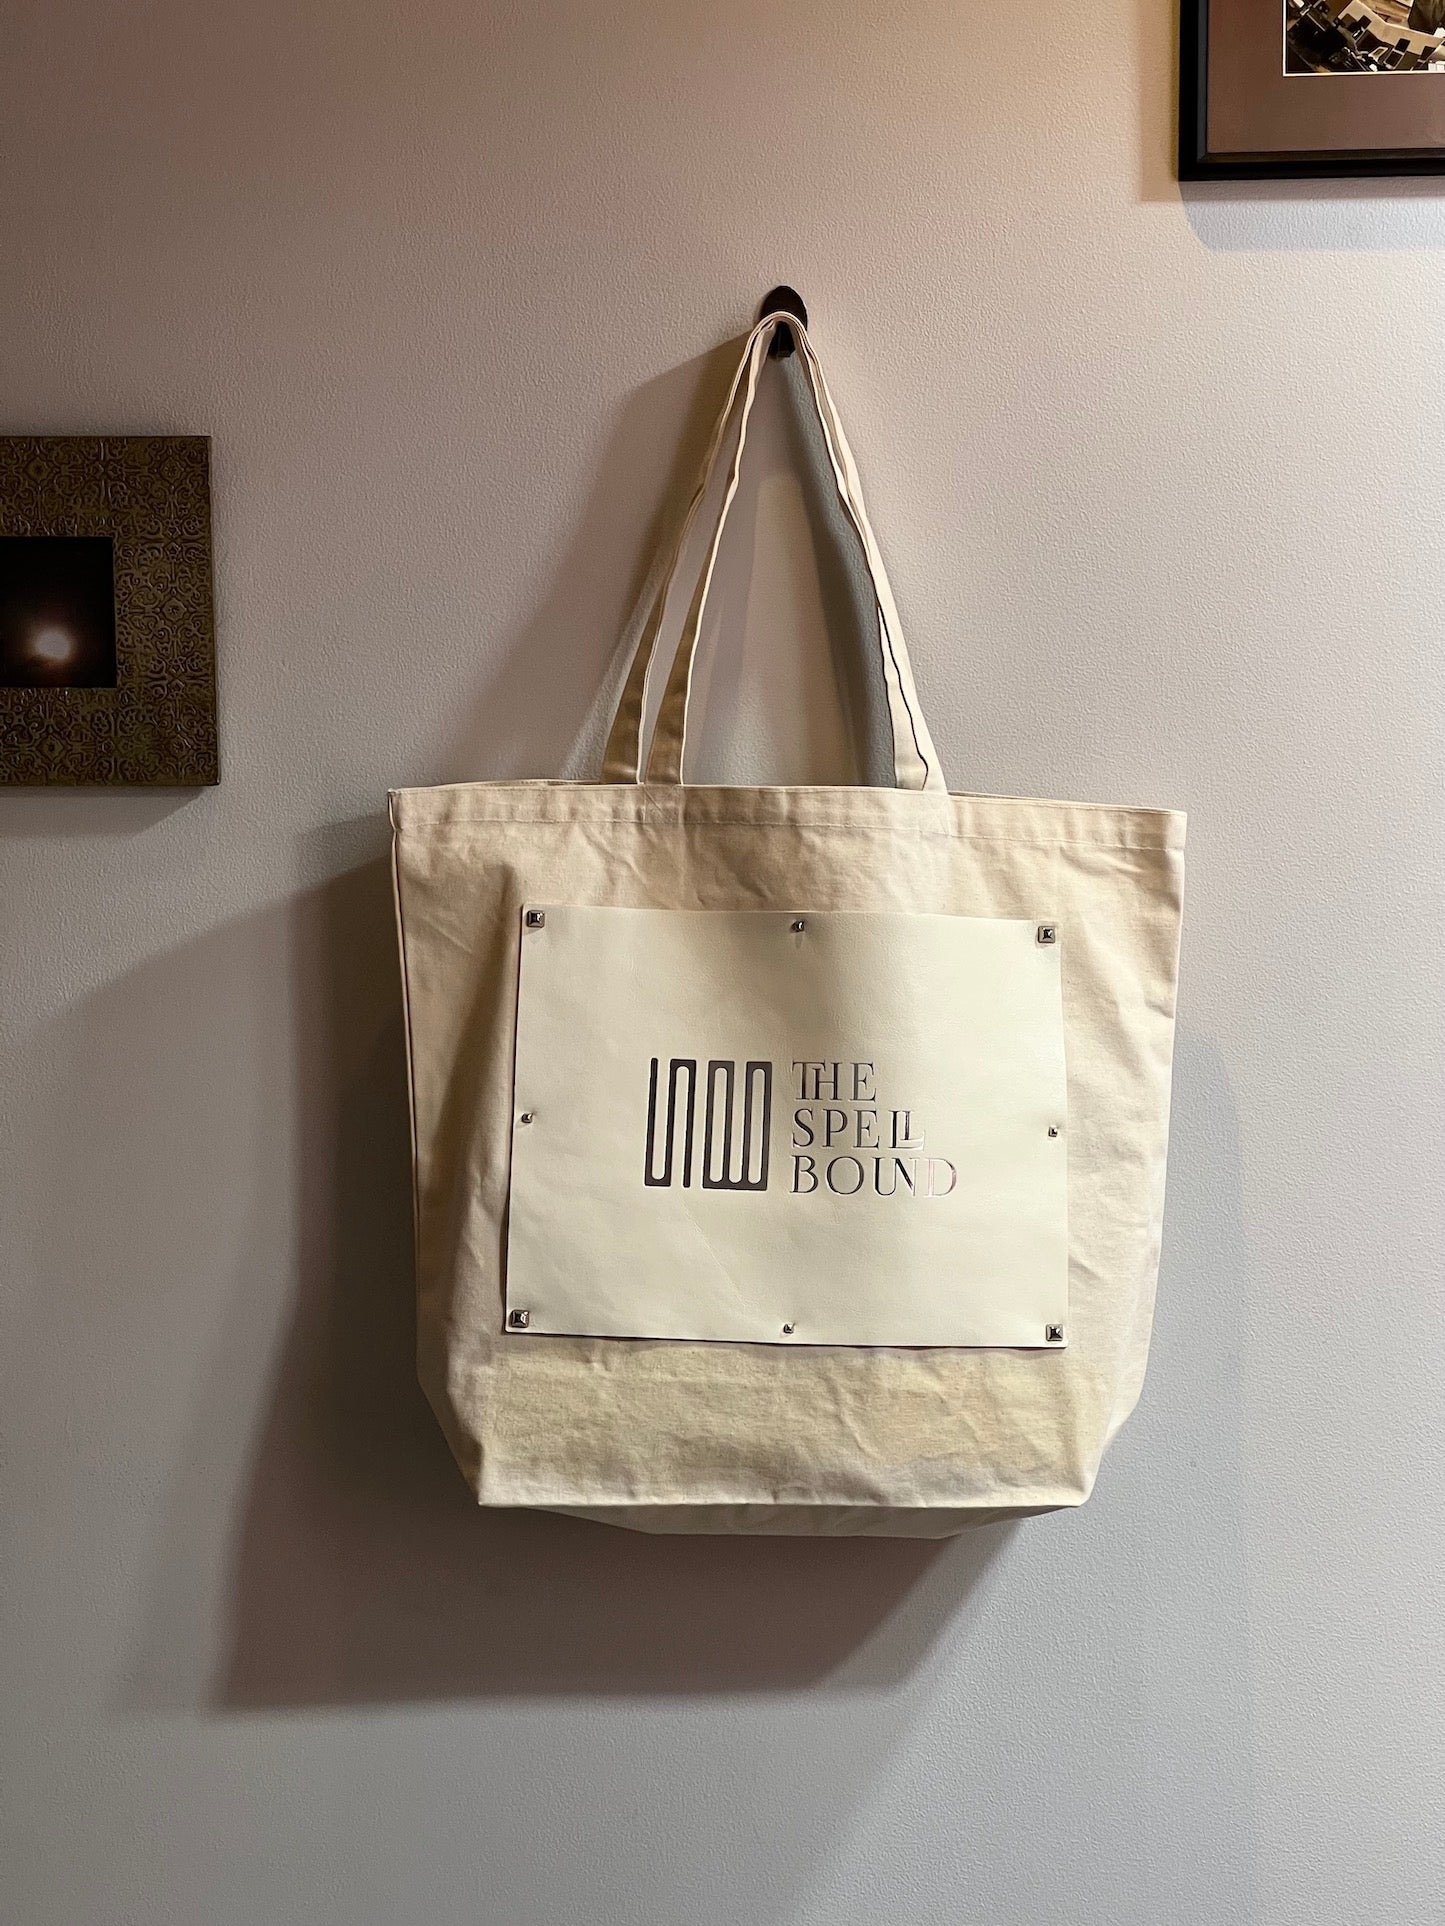 THE SPELLBOUND Tote Bag